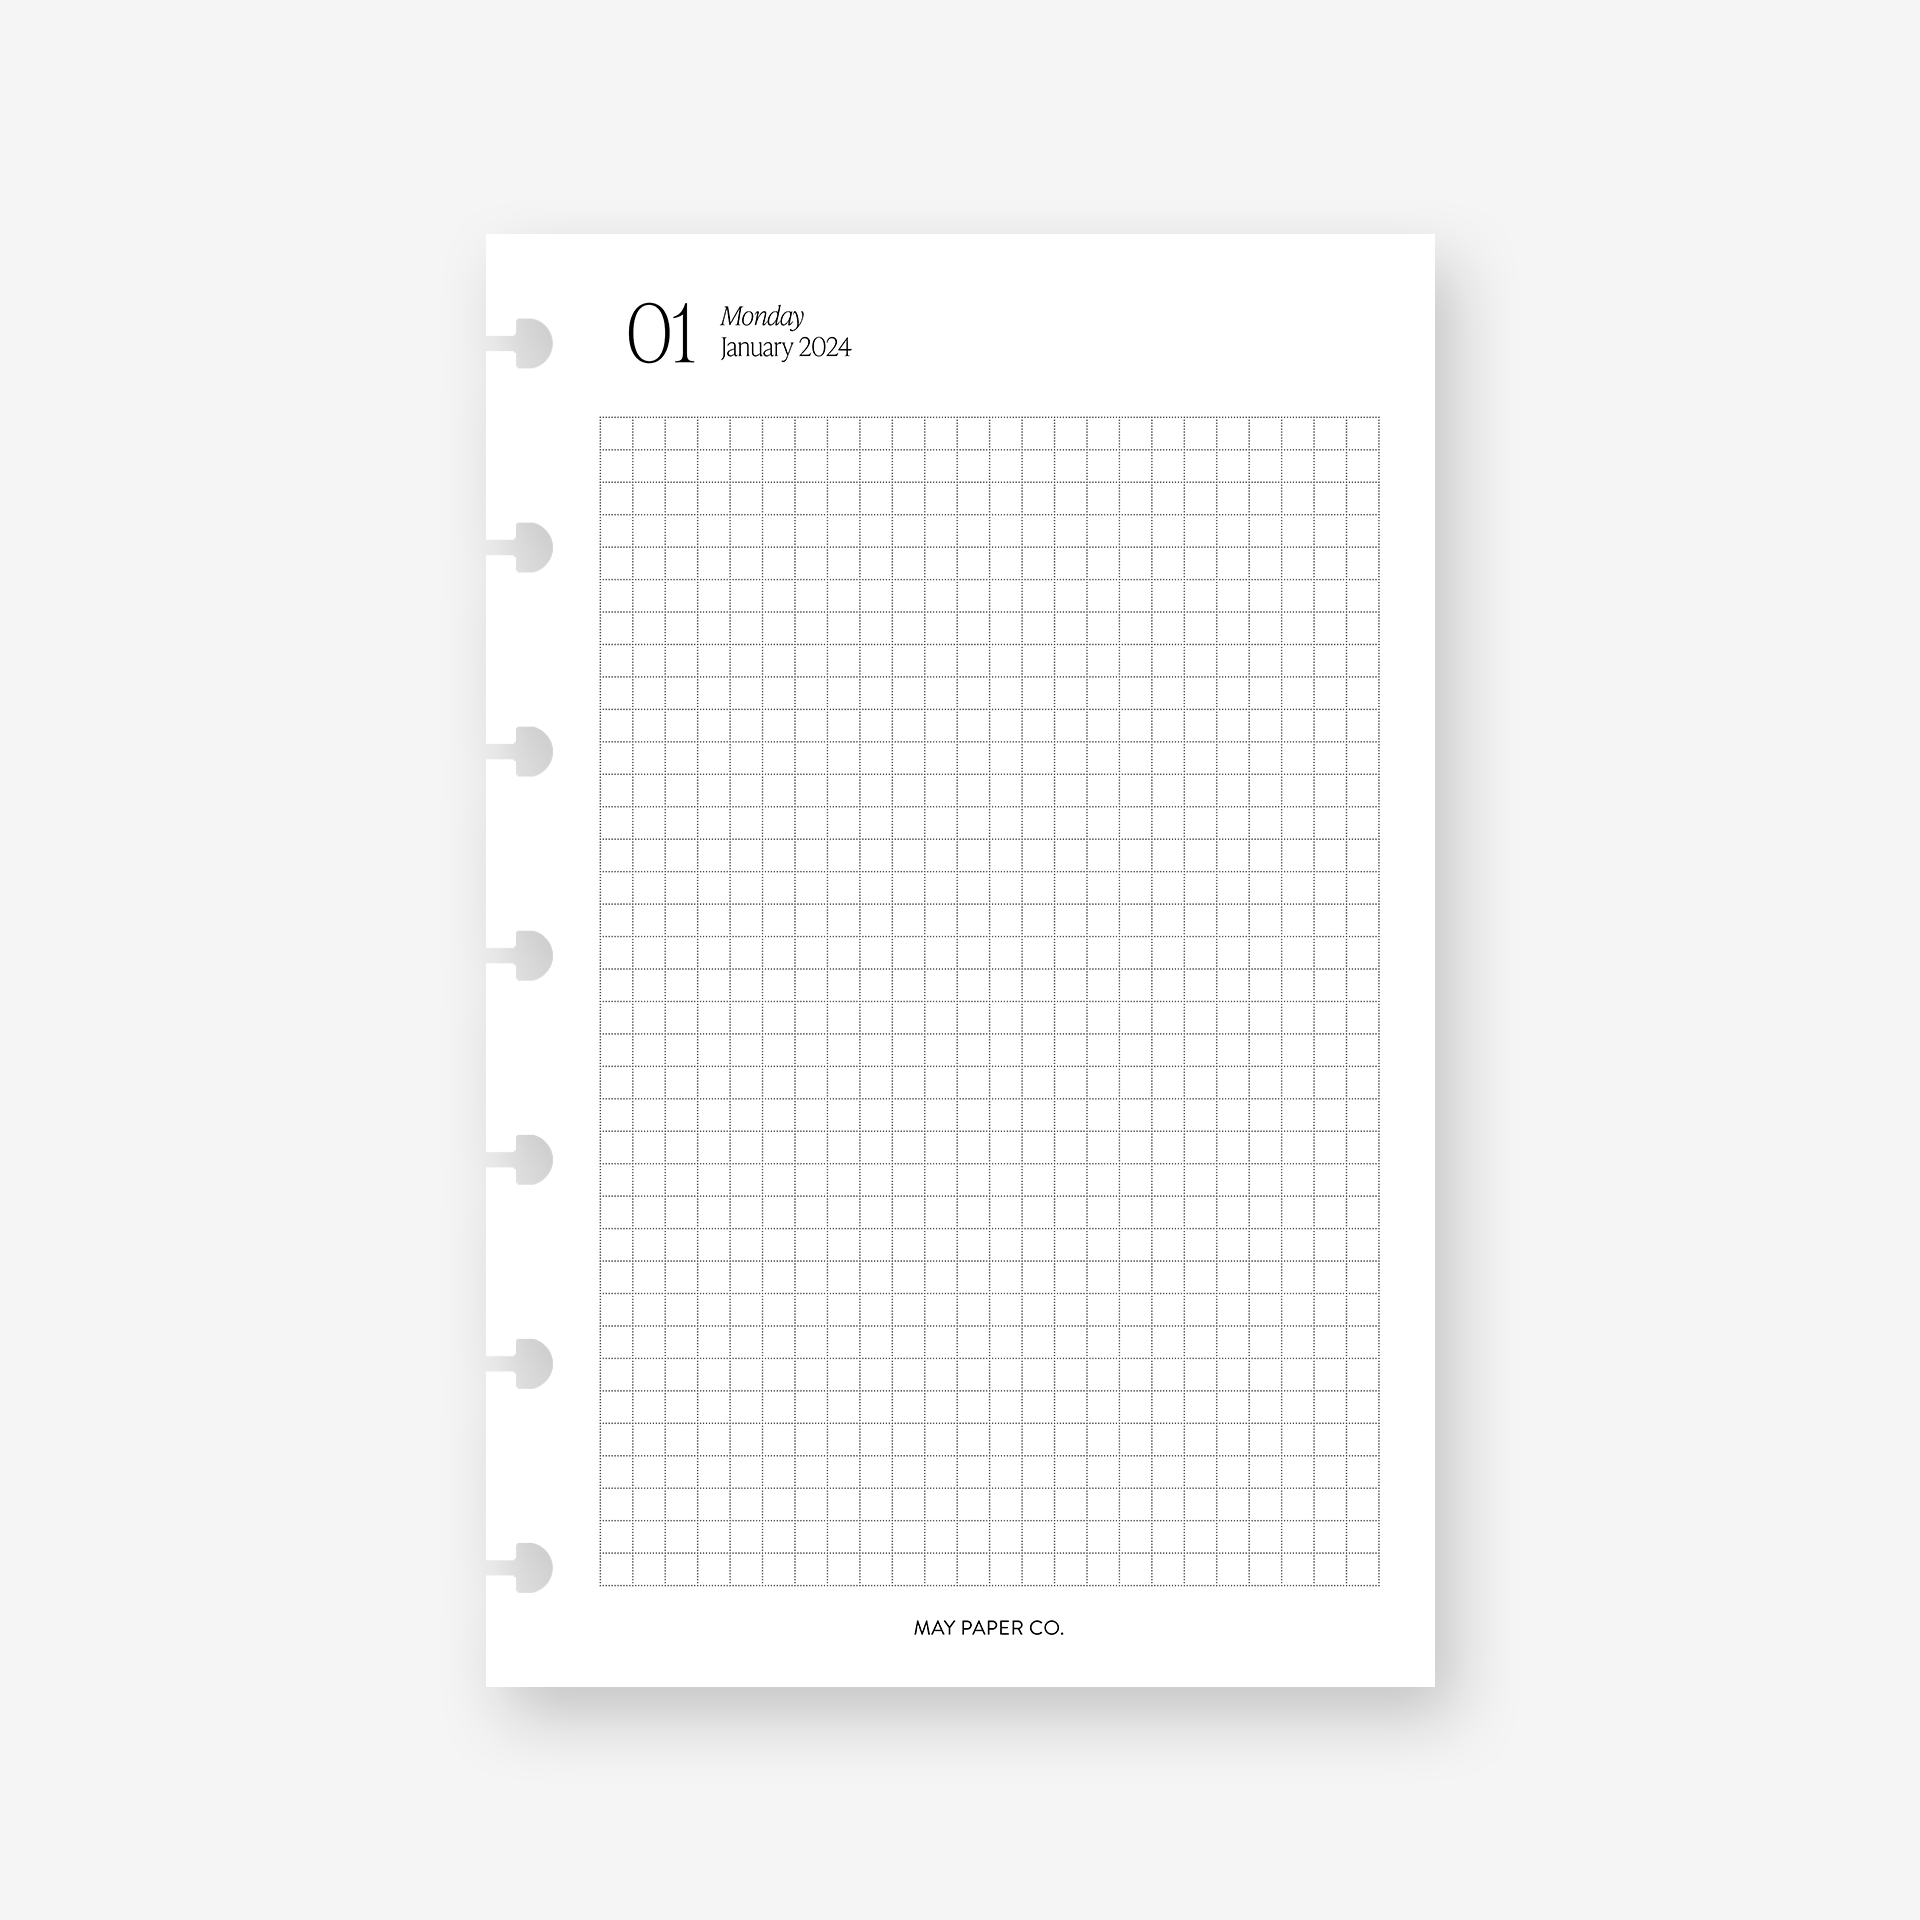 Printable 2024 Daily Planner Dated in French for A4 and A5 Agenda Refill,  Insert With Program, Objective, Menu 